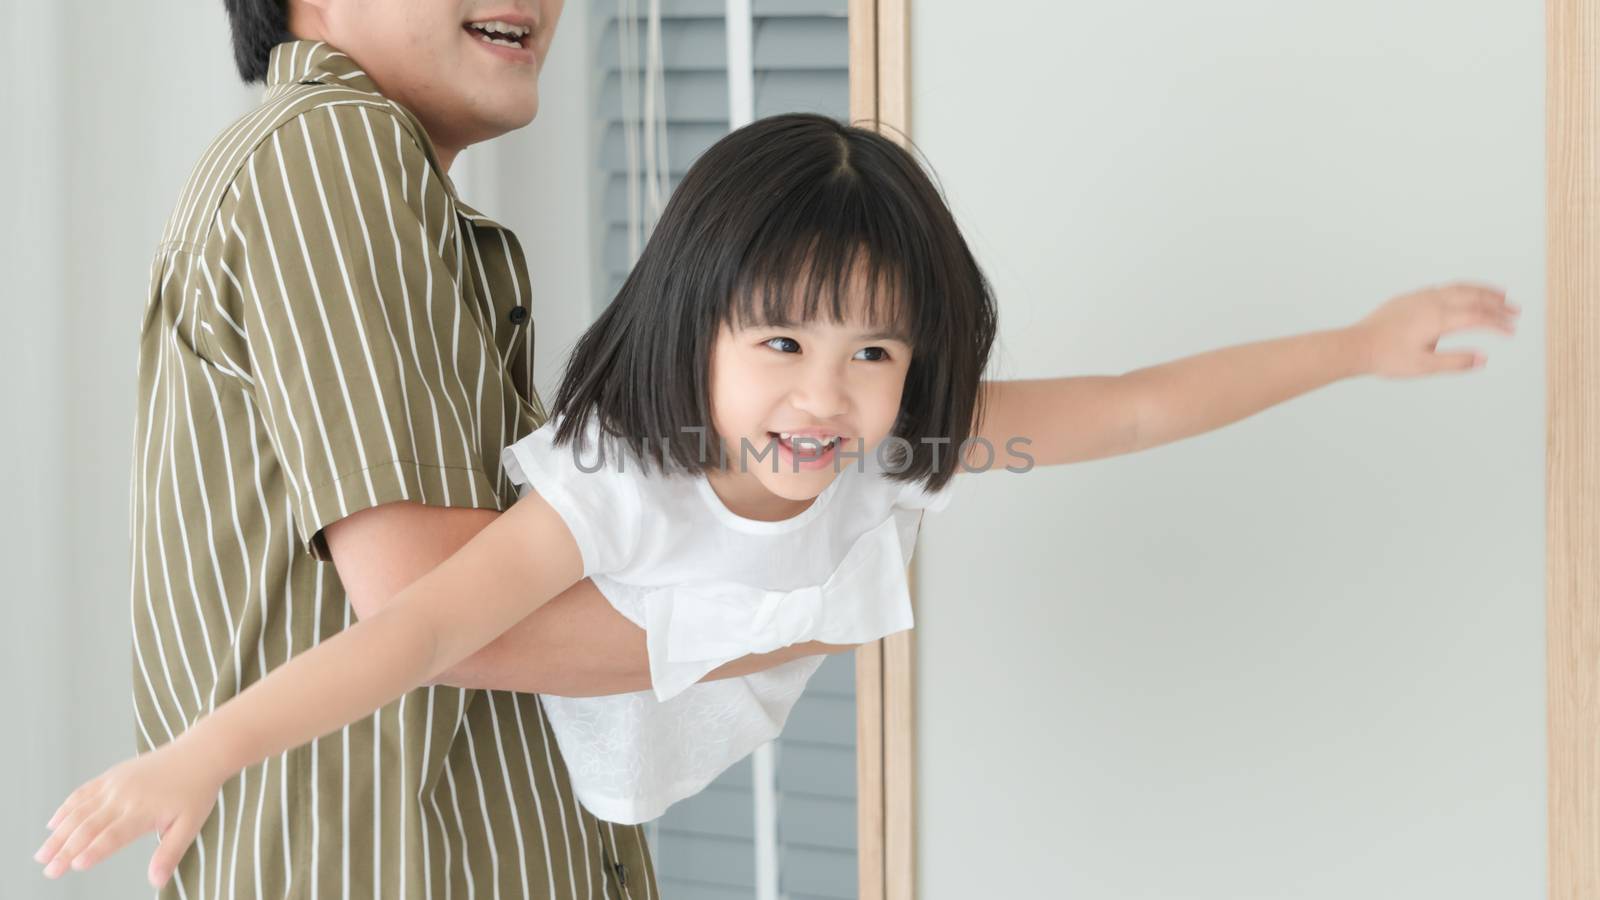 An Asian family with a cute father and daughter. They were having fun playing in the bedroom. The father picked up his daughter and then became obsessed with it.